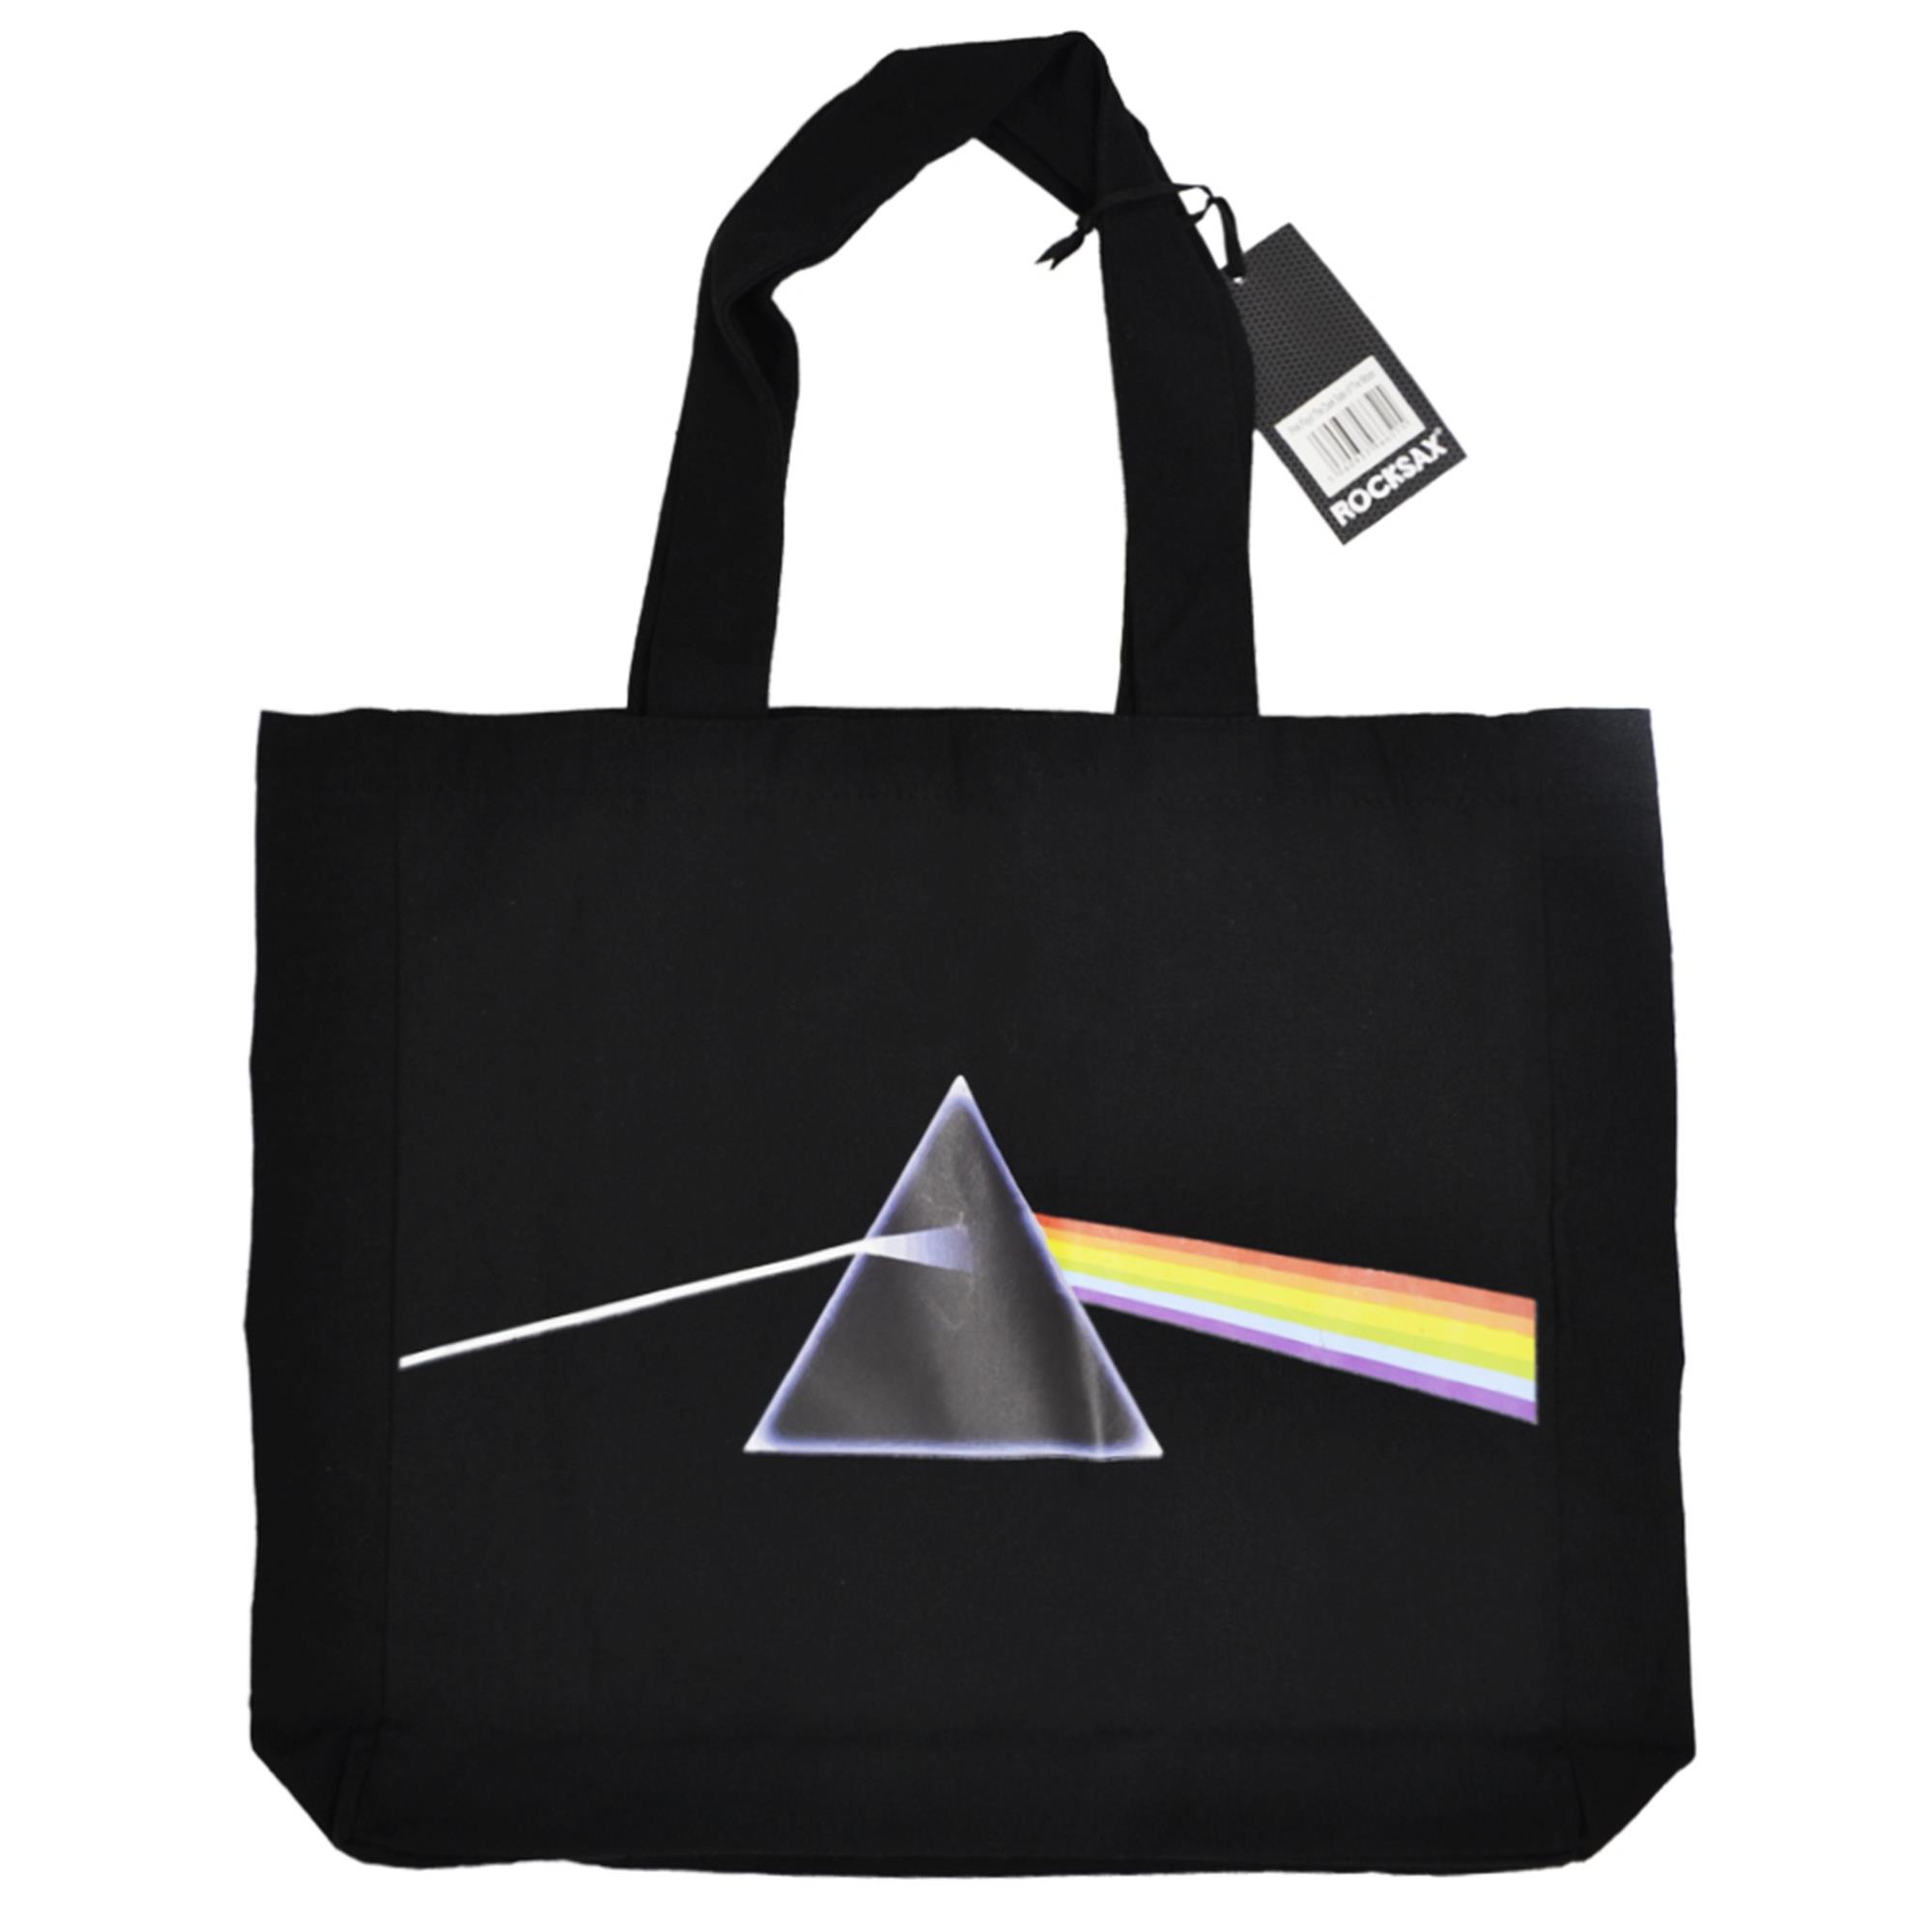 The Dark Side Of The Moon Tote Bag